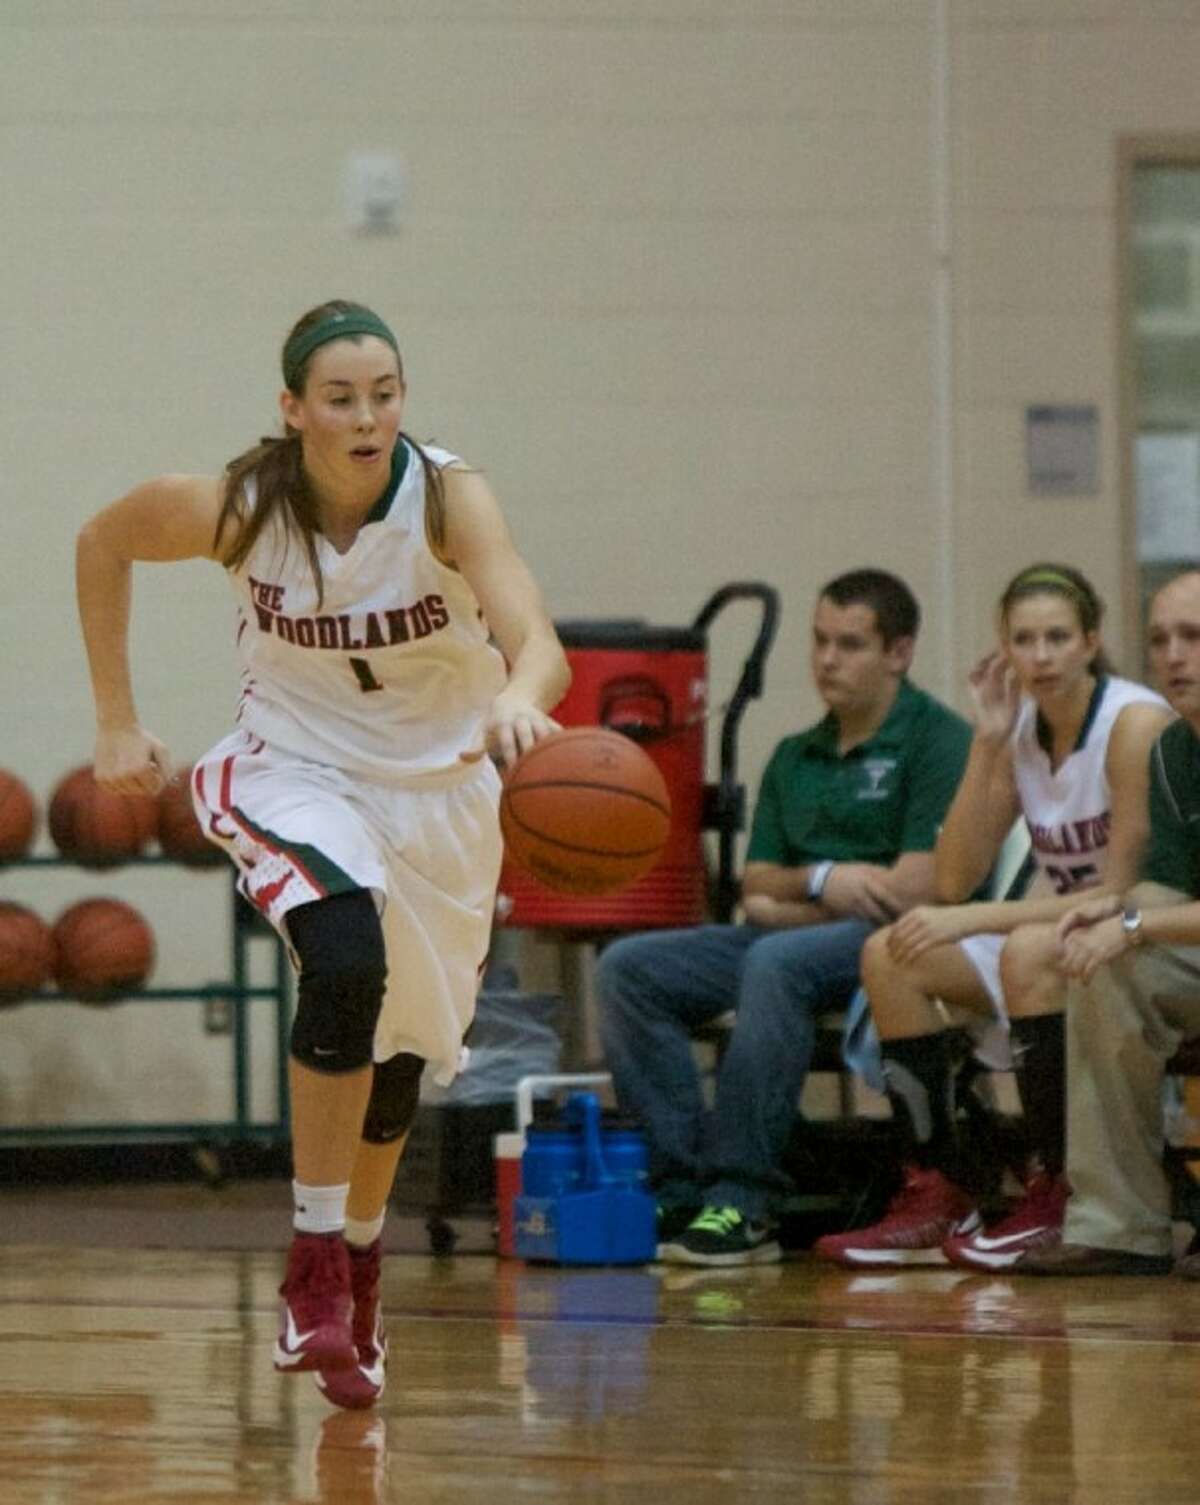 The Woodlands’ Nicole Iademarco dribbles downcourt during a game last season.